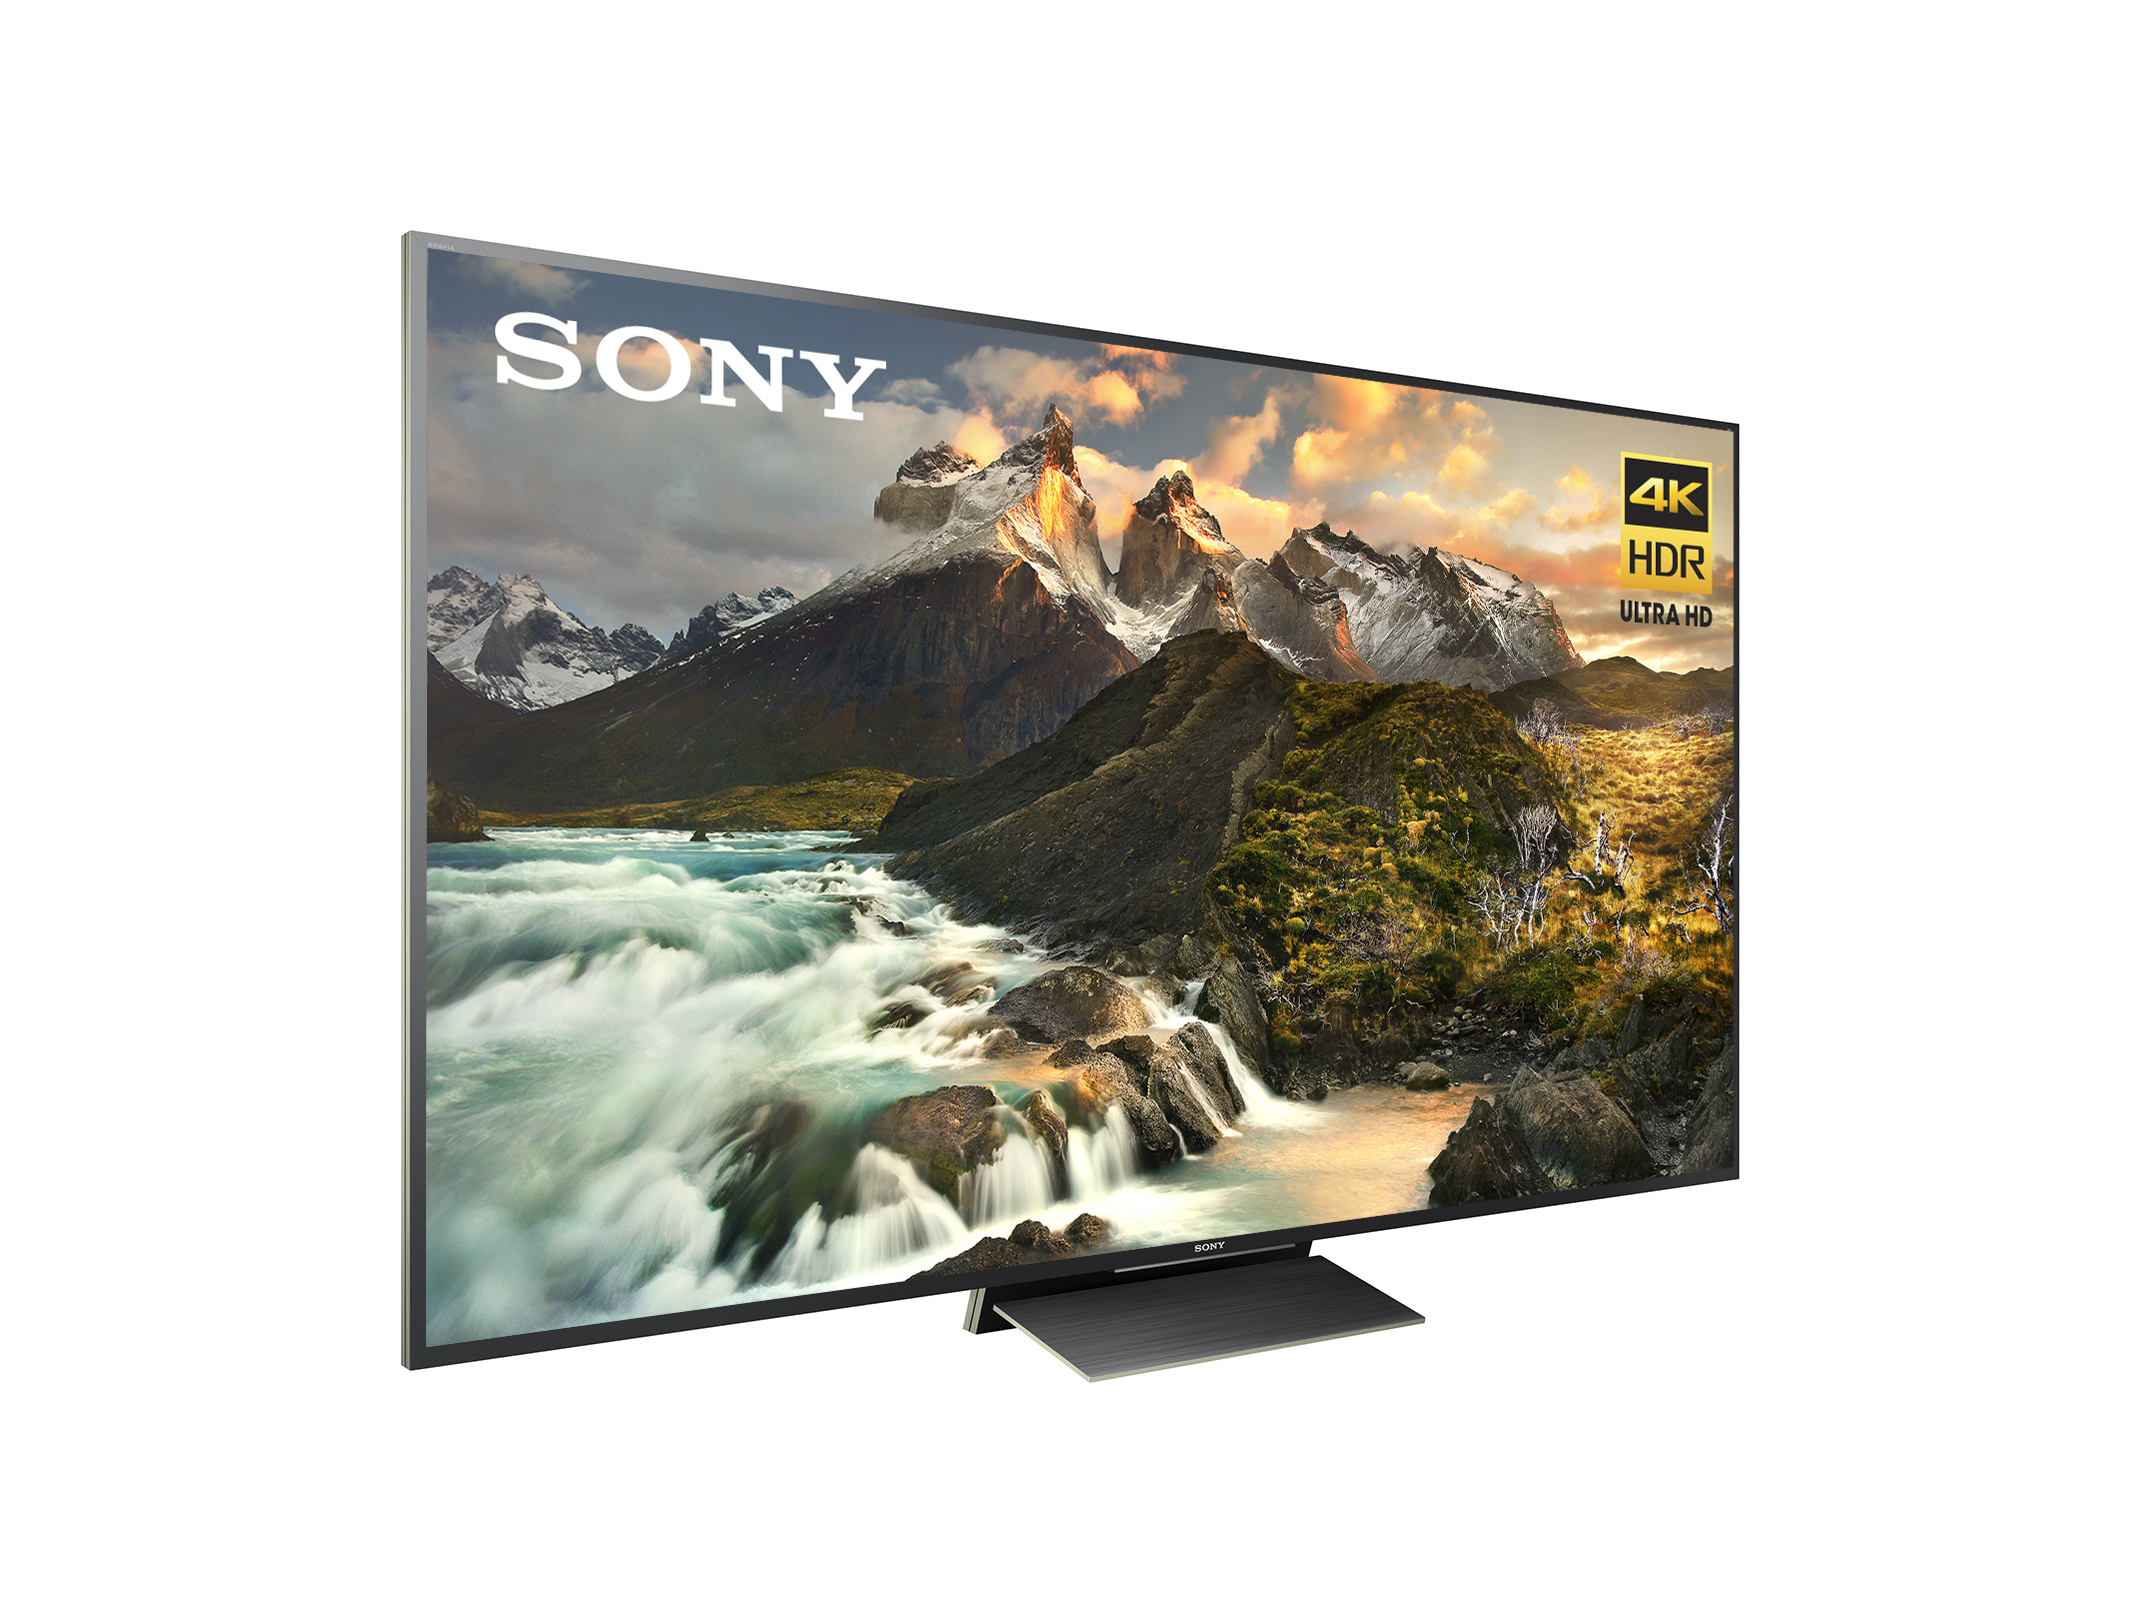 Sony Selects Southern California to Introduce World’s First Master LED 4K Ultra HDTV at Video & Audio Center